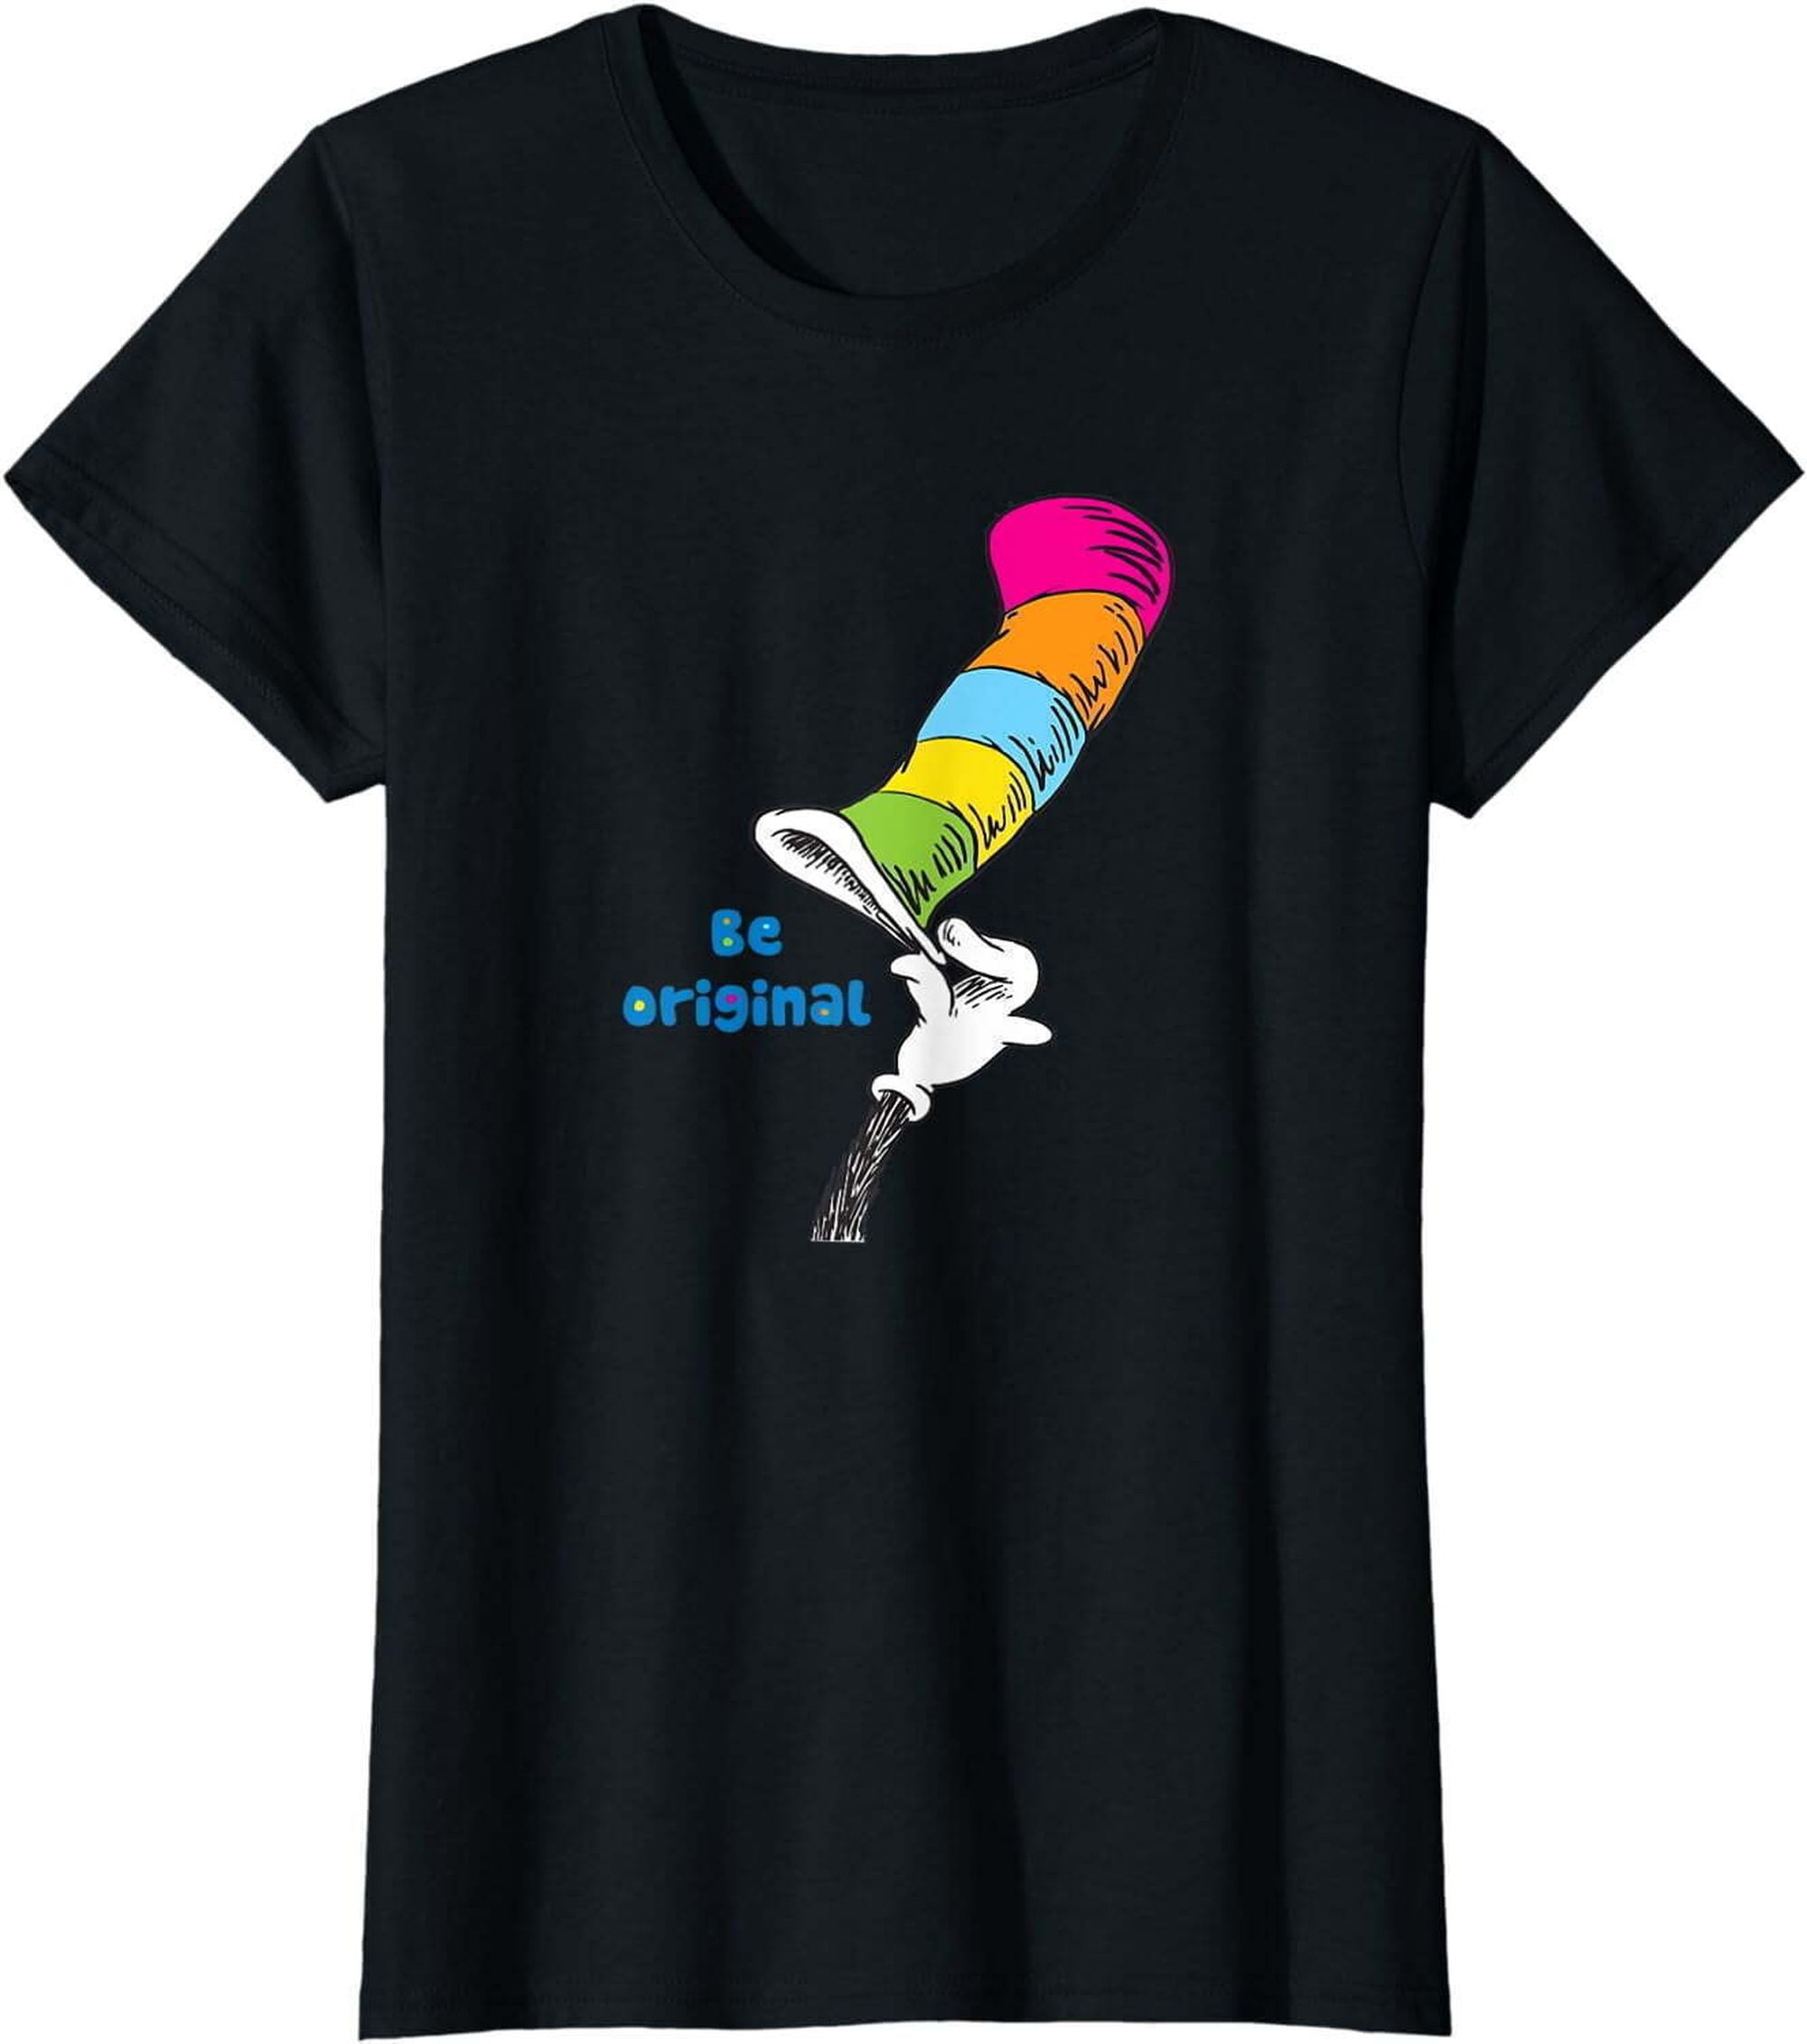 Original Black Short Sleeve Tee: Celebrate With Dr. Seuss Party Shirts 